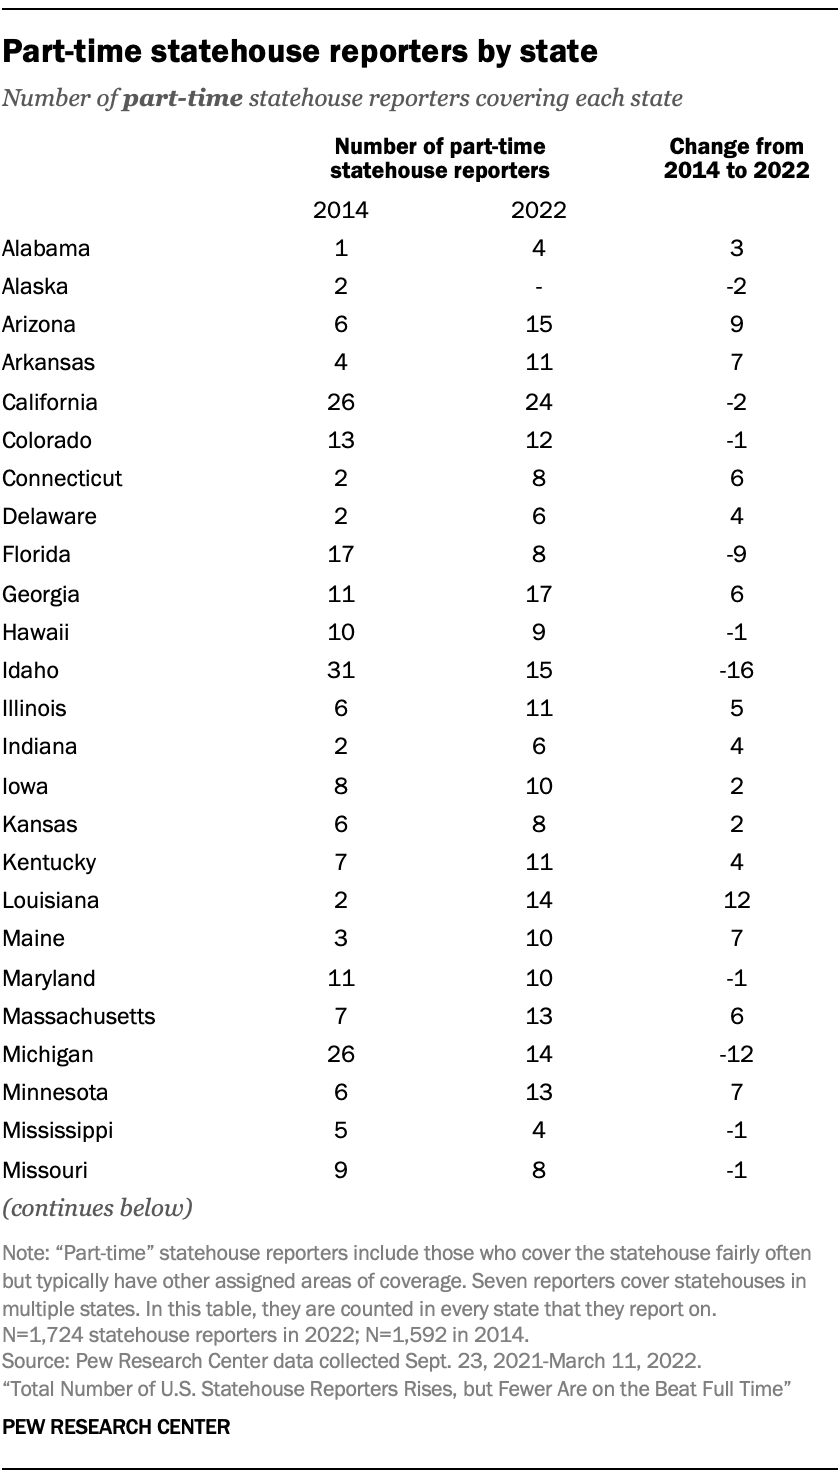 Part-time statehouse reporters by state (Alabama-Missouri)